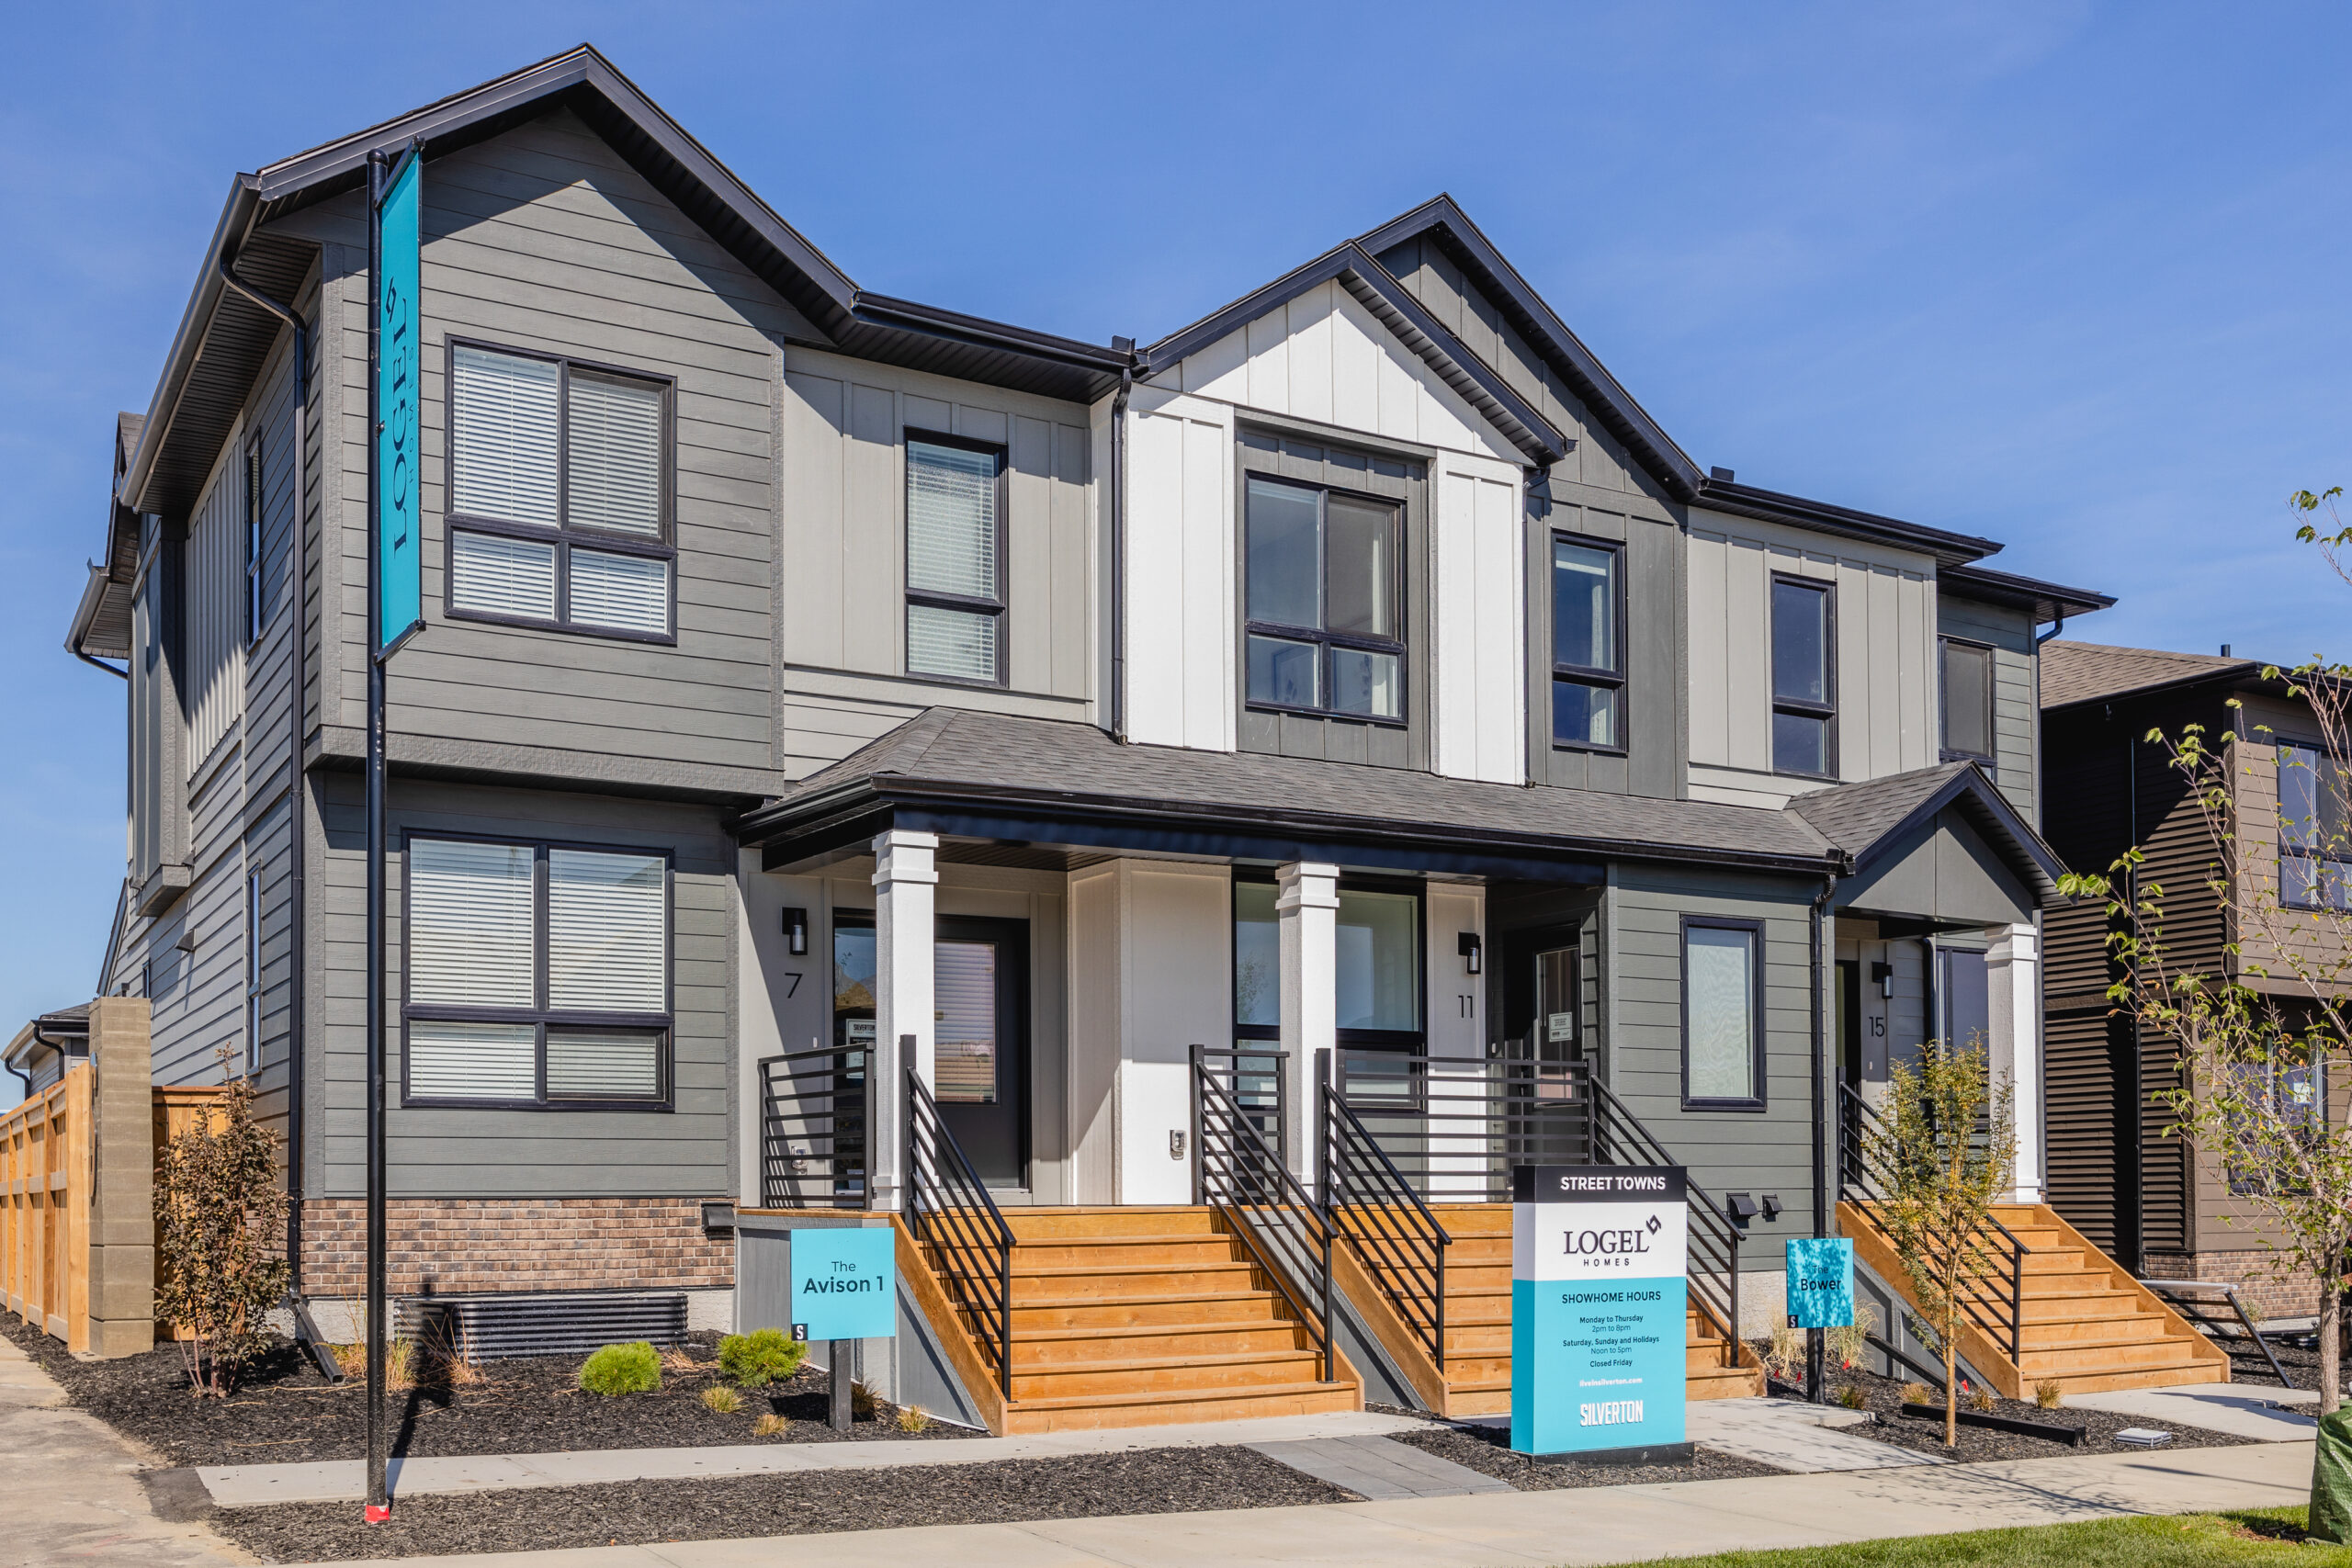 Exterior view of the Silverton Street Towns by Logel Homes show-home block.